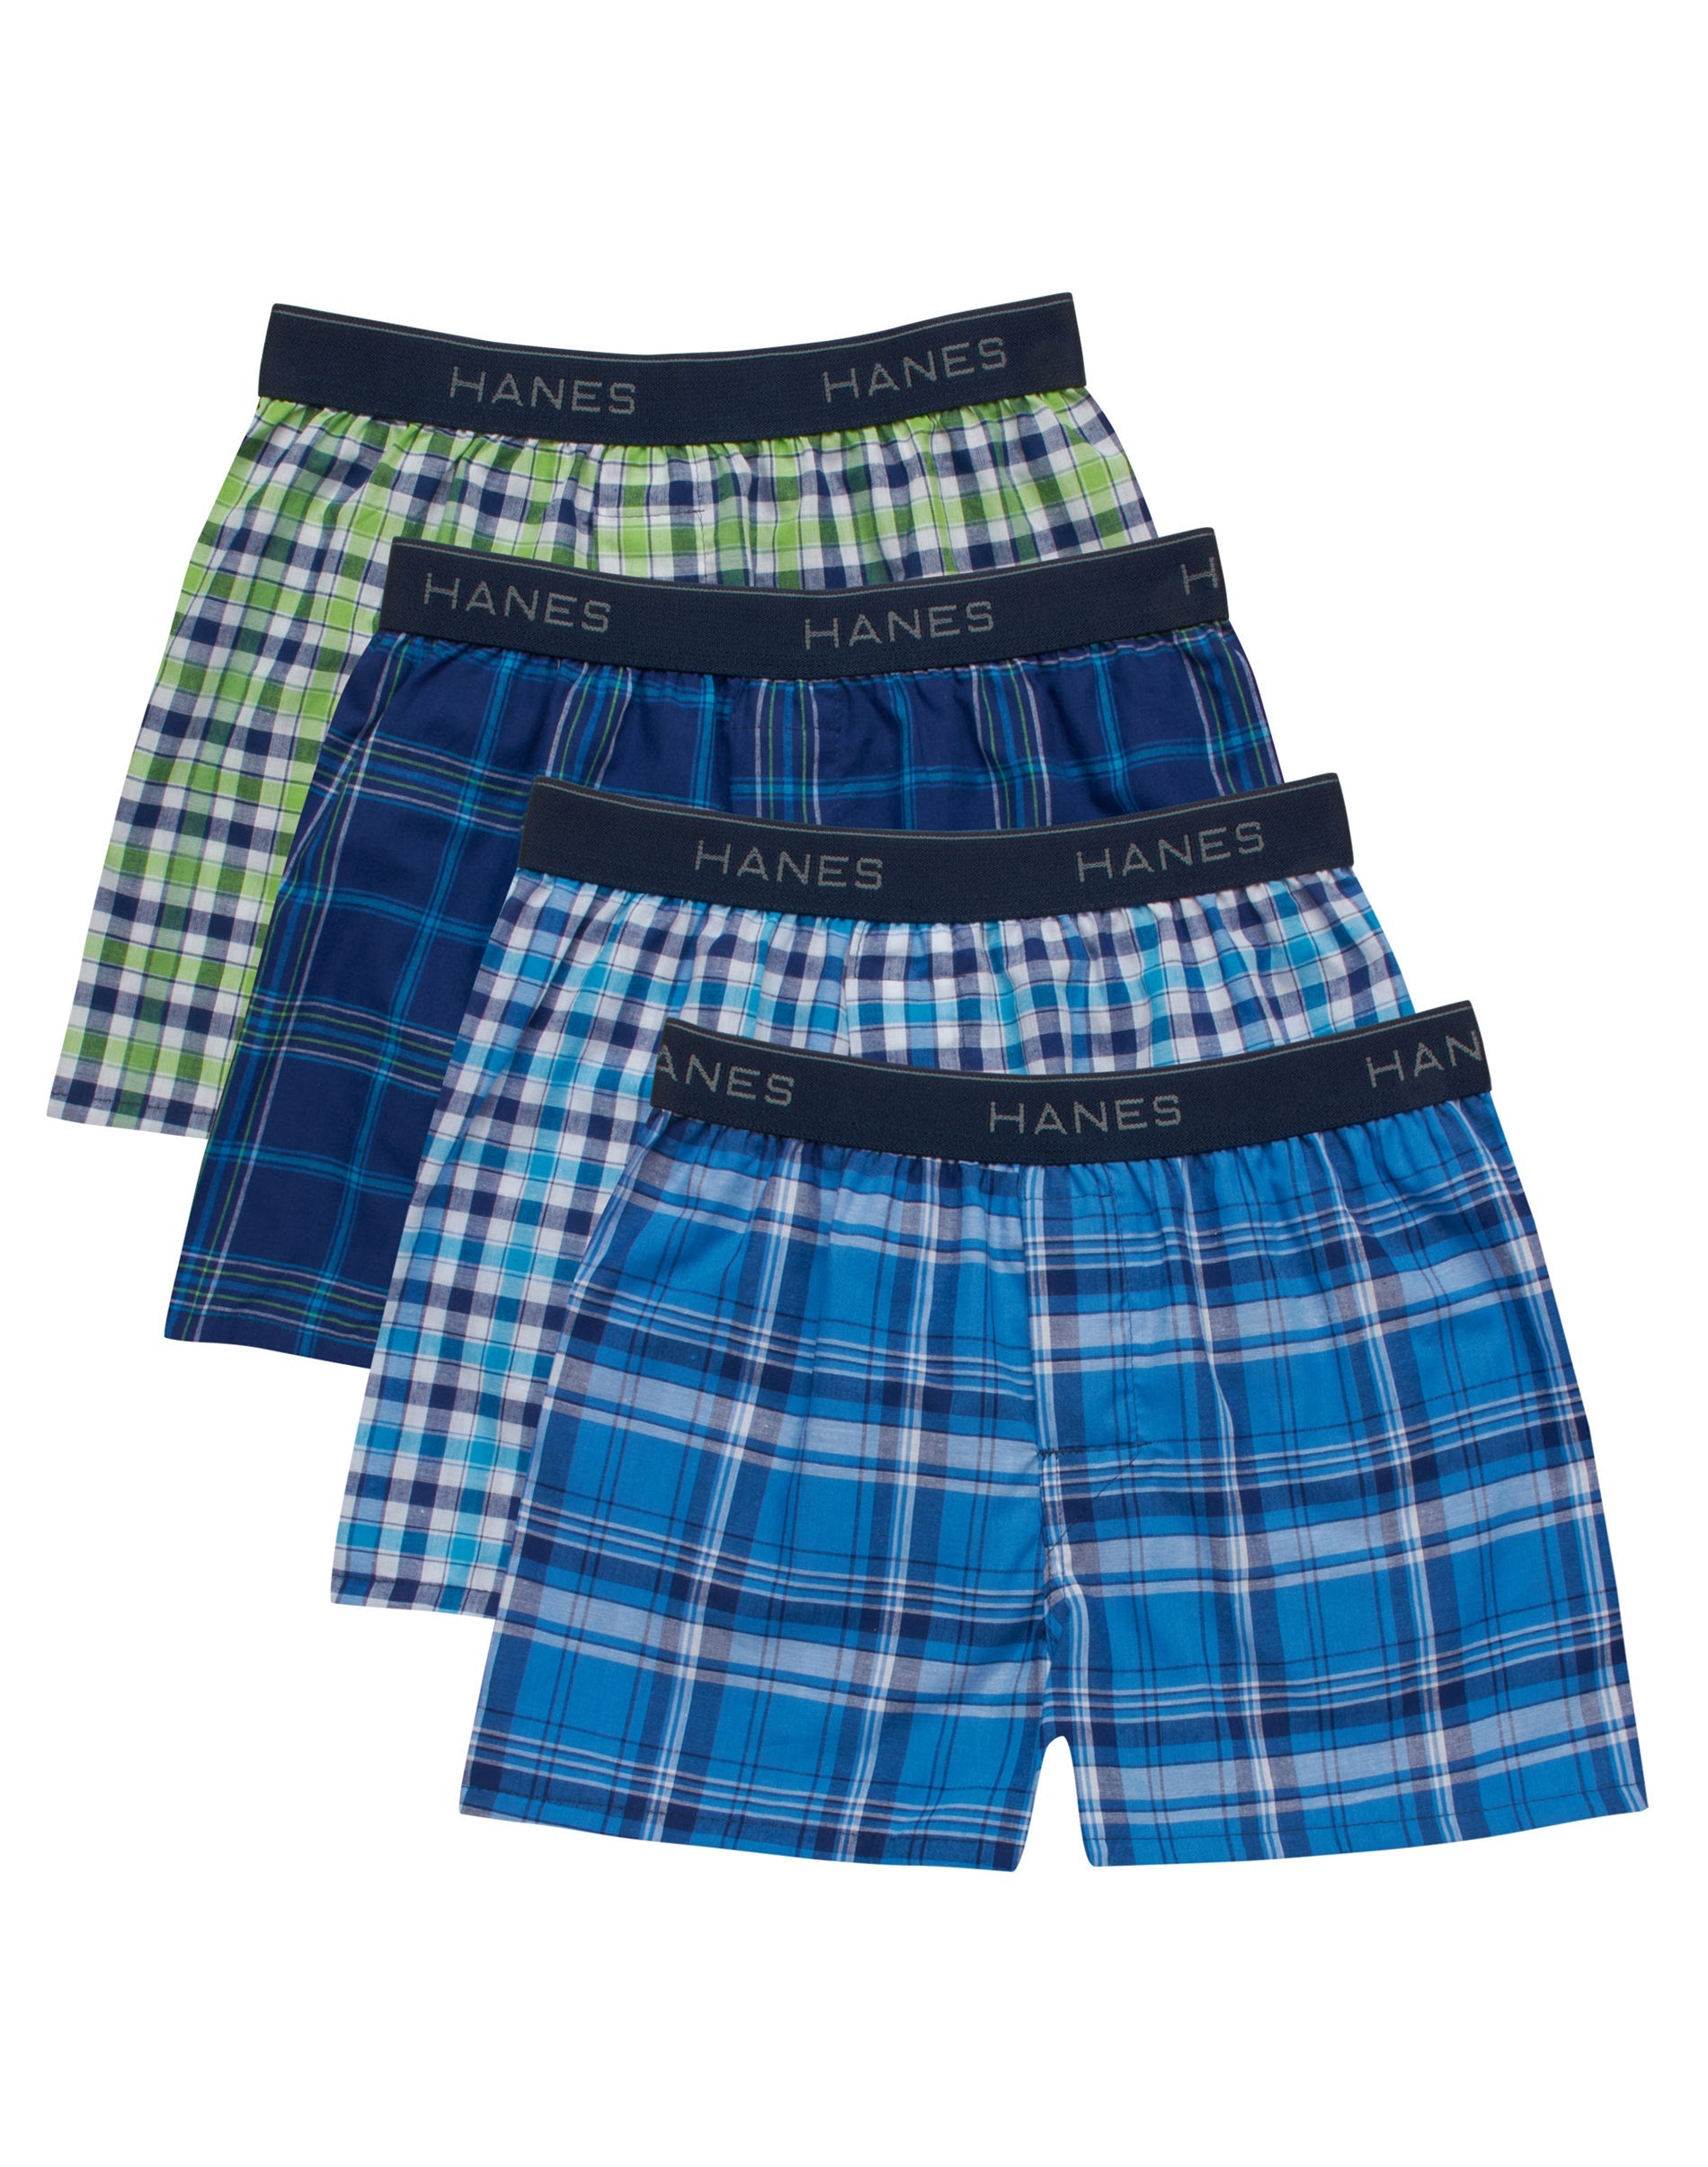 HANES Boys' Ultimate Briefs W/ ComfortSoft Waistband, 5-Pack